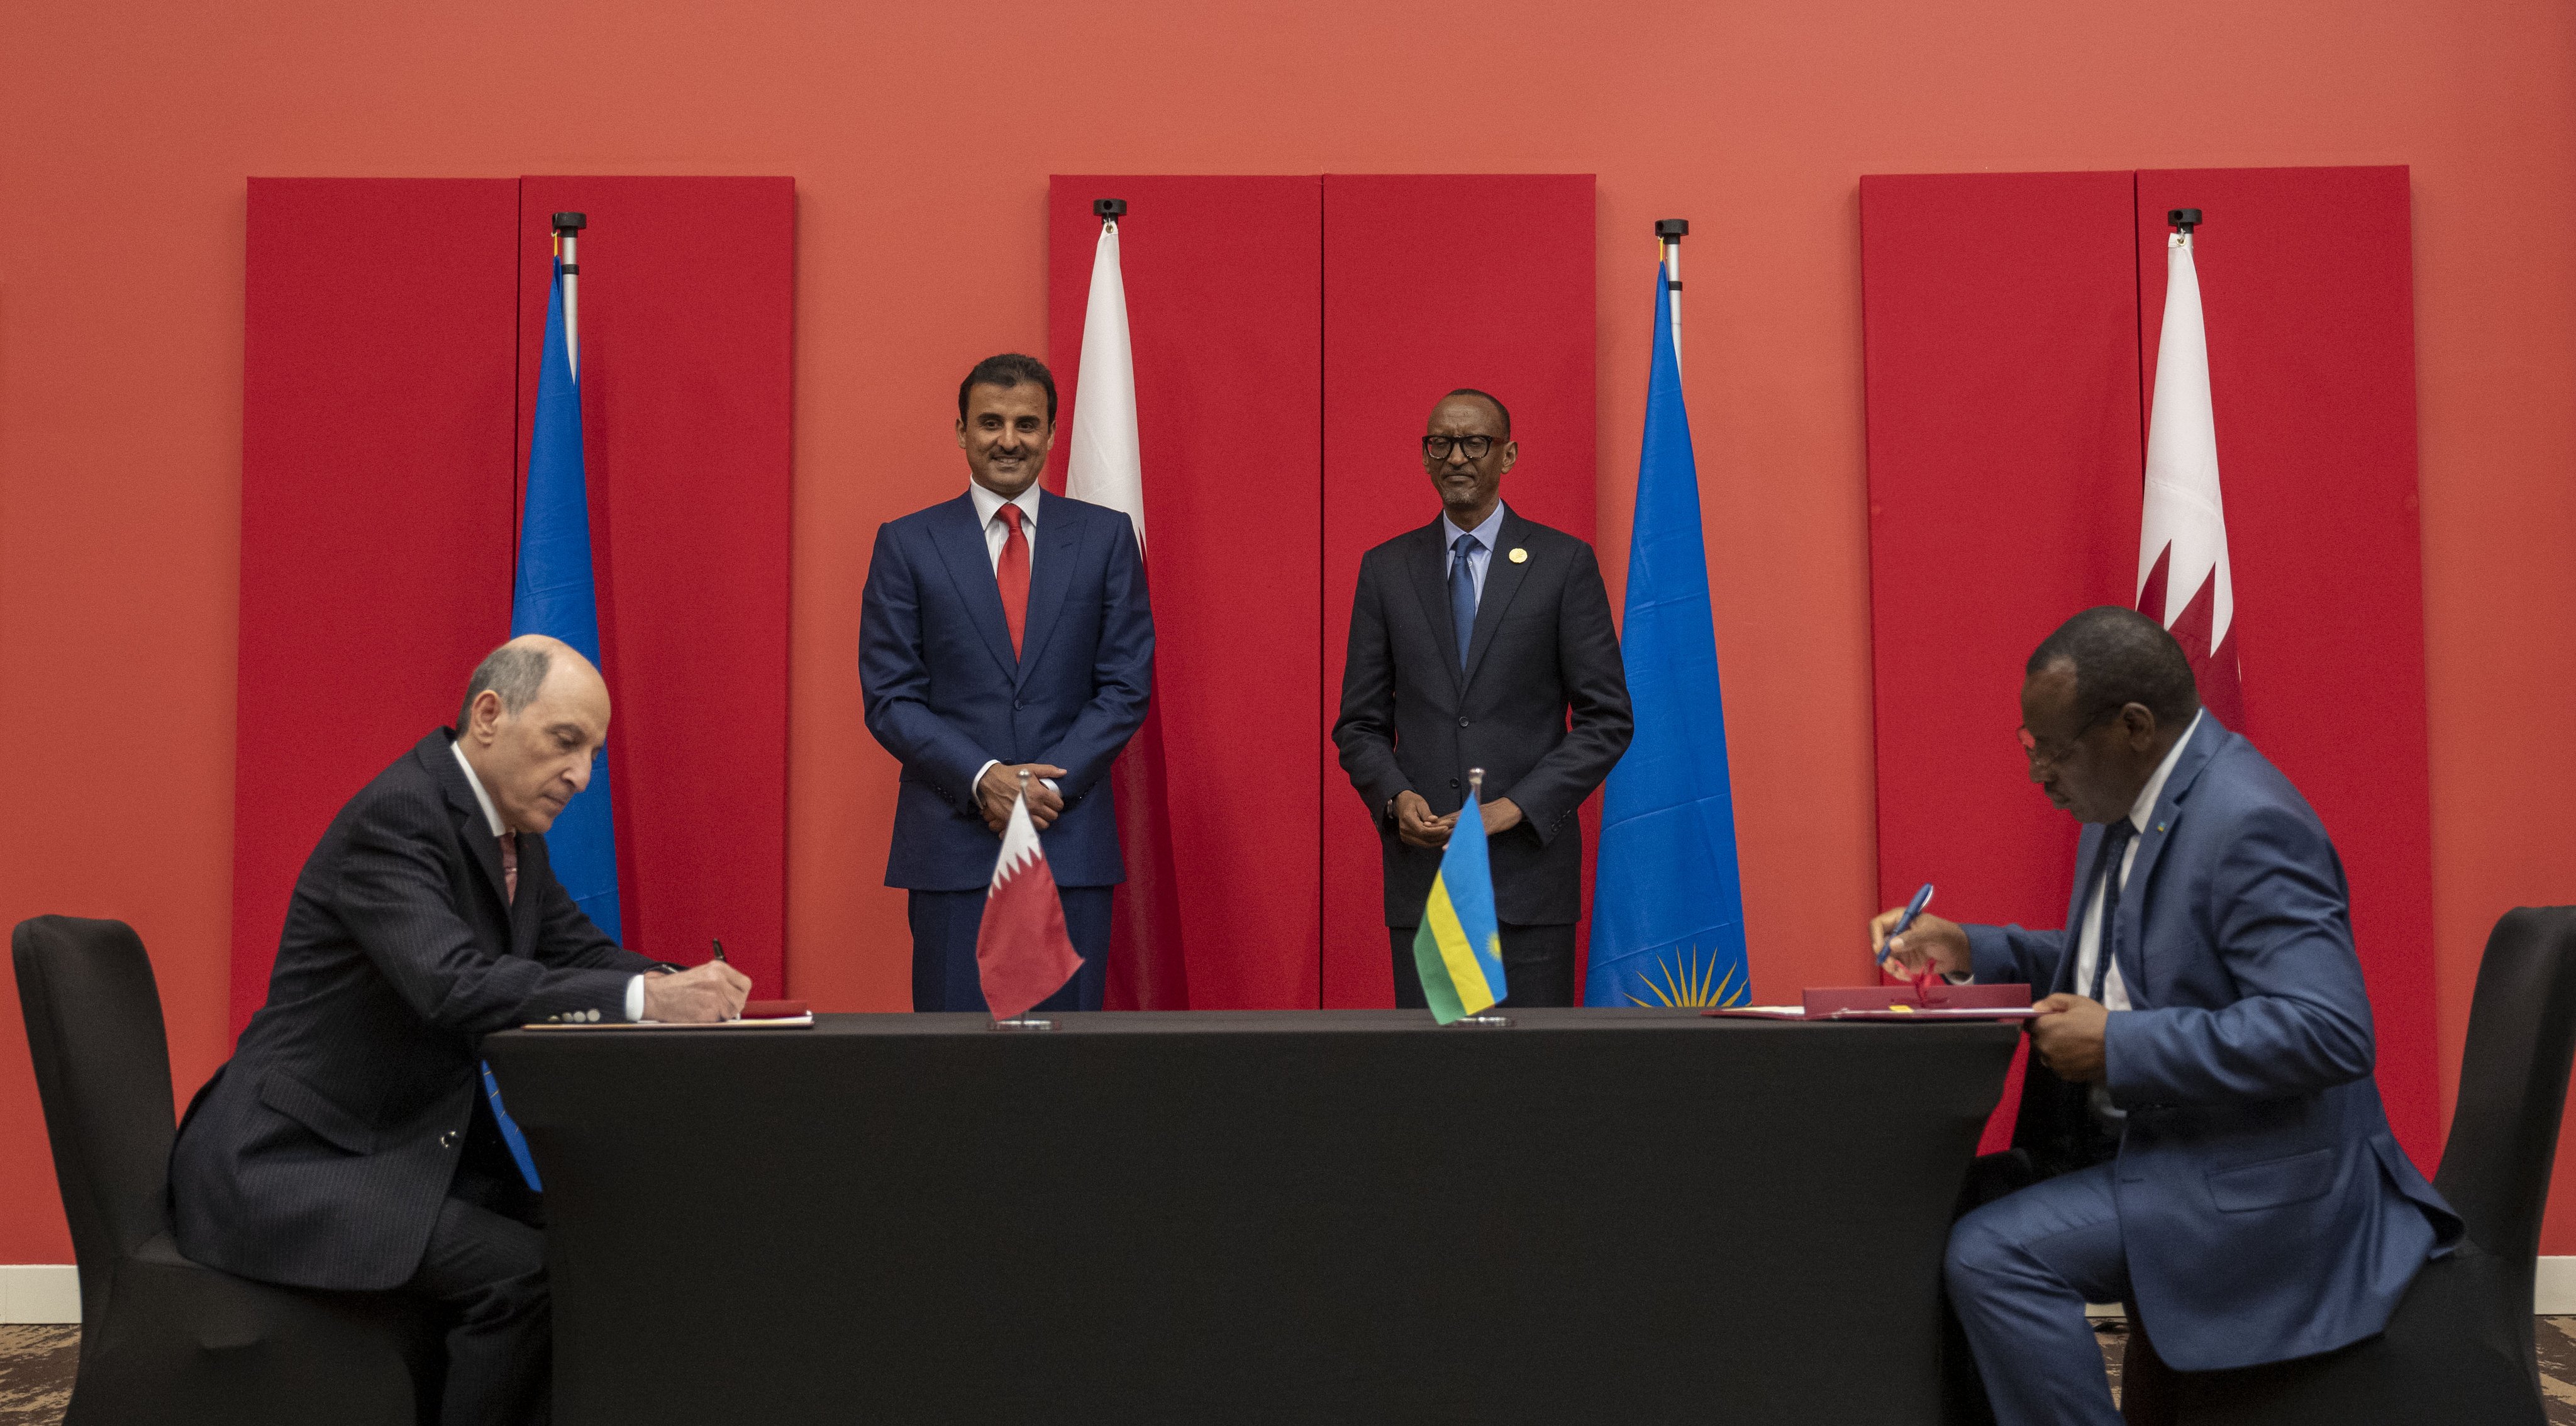 President Kagame and the Emir of Qatar witness the signing of three agreements between the governments of the two countries. (Courtesy)